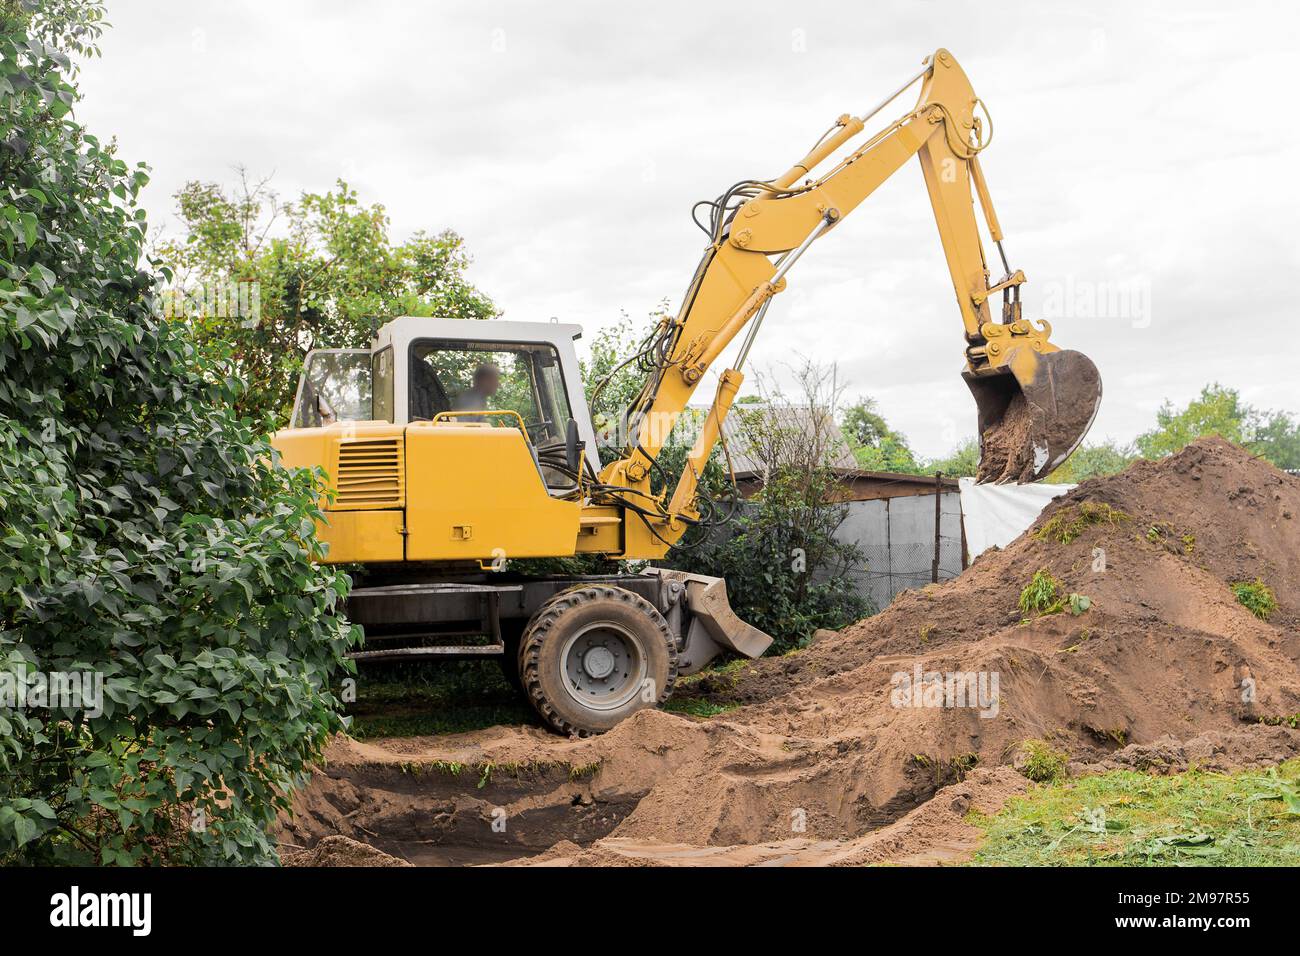 A excavator is digging on outdoors in an industrial site. Excavation works. Stock Photo